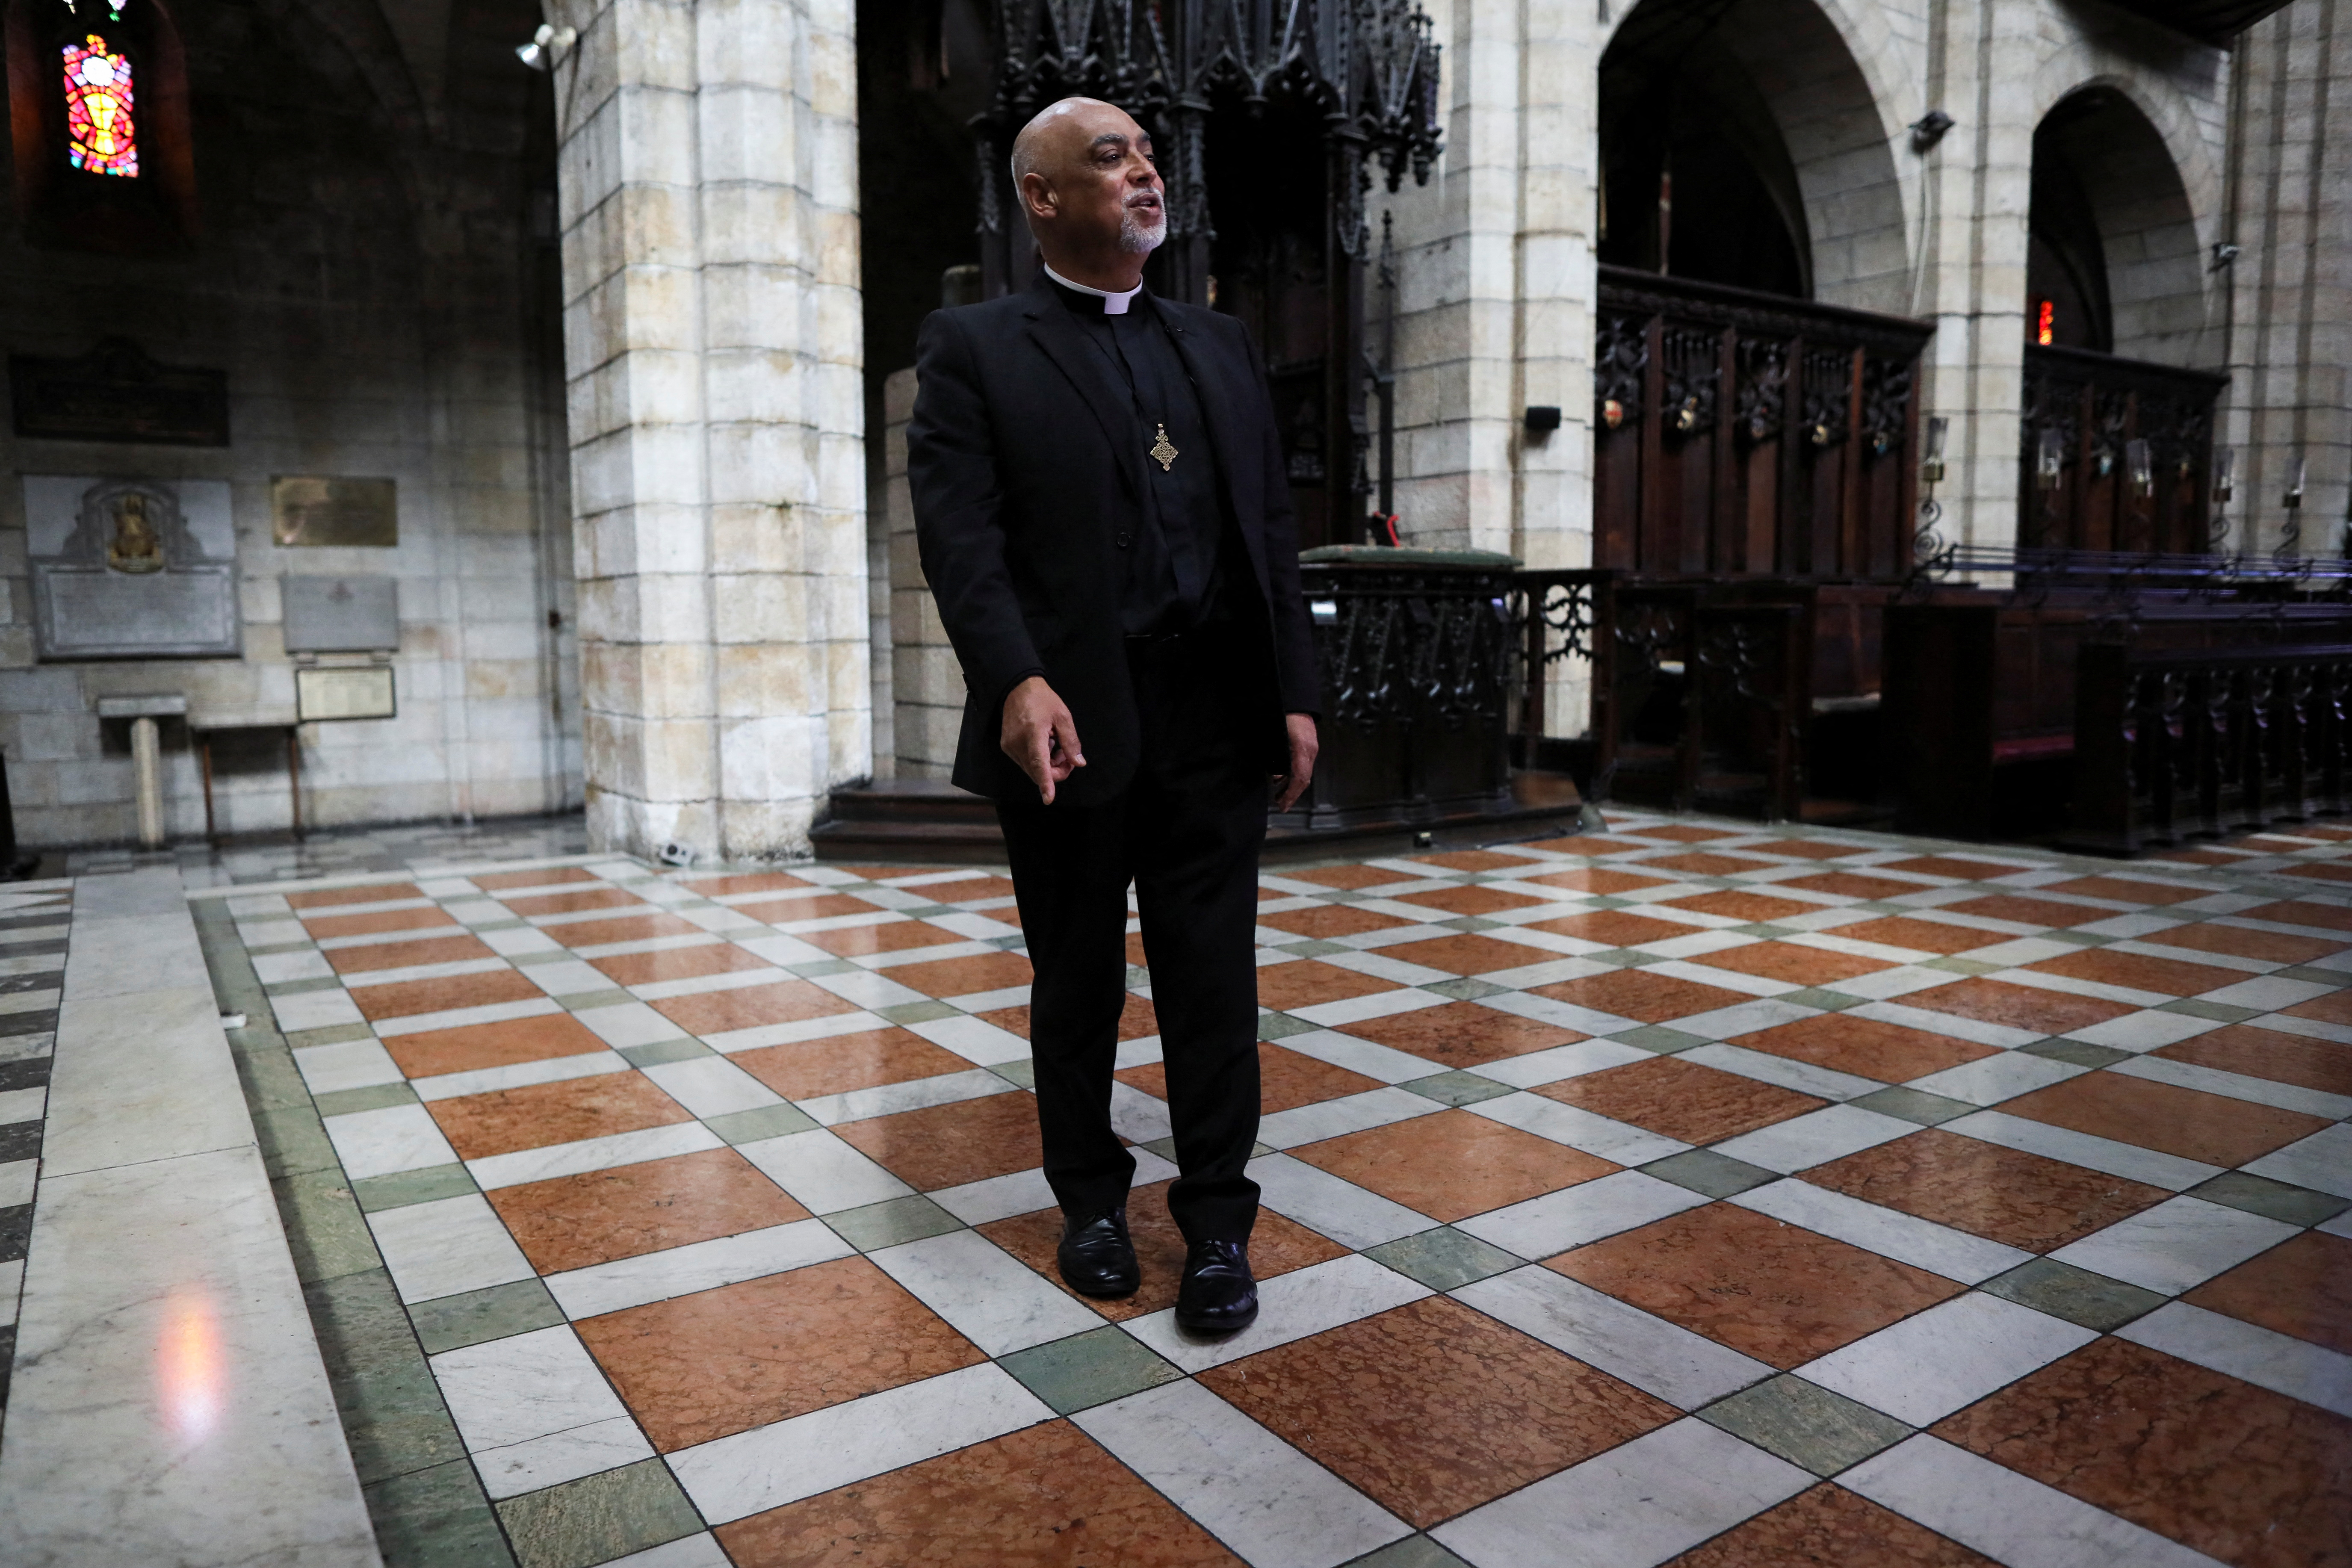 The Dean of St. George's Cathedral, the Very Reverend Michael Weeder points to the place where the remains of Archbishop Emeritus Desmond Tutu will be interred at St. George's Cathedral in Cape Town